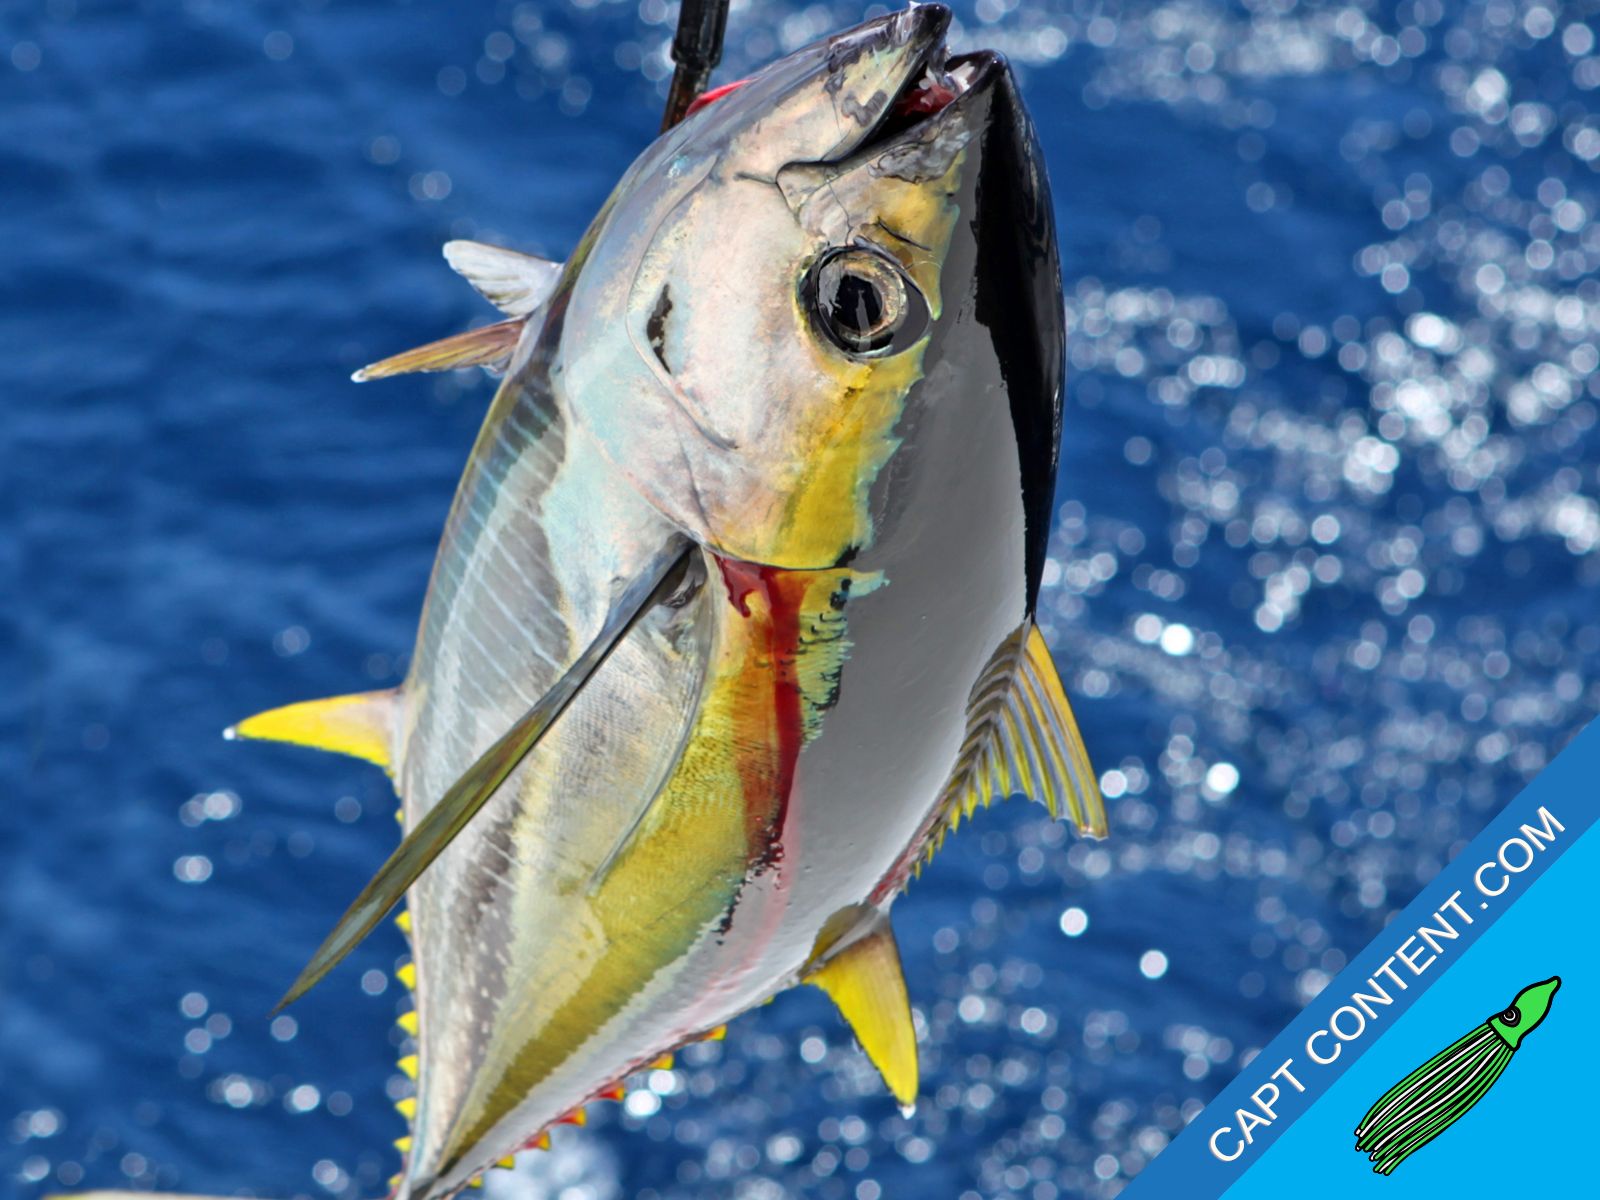 Yellowfin Tuna being gaffed and brought onboard a fishing boat